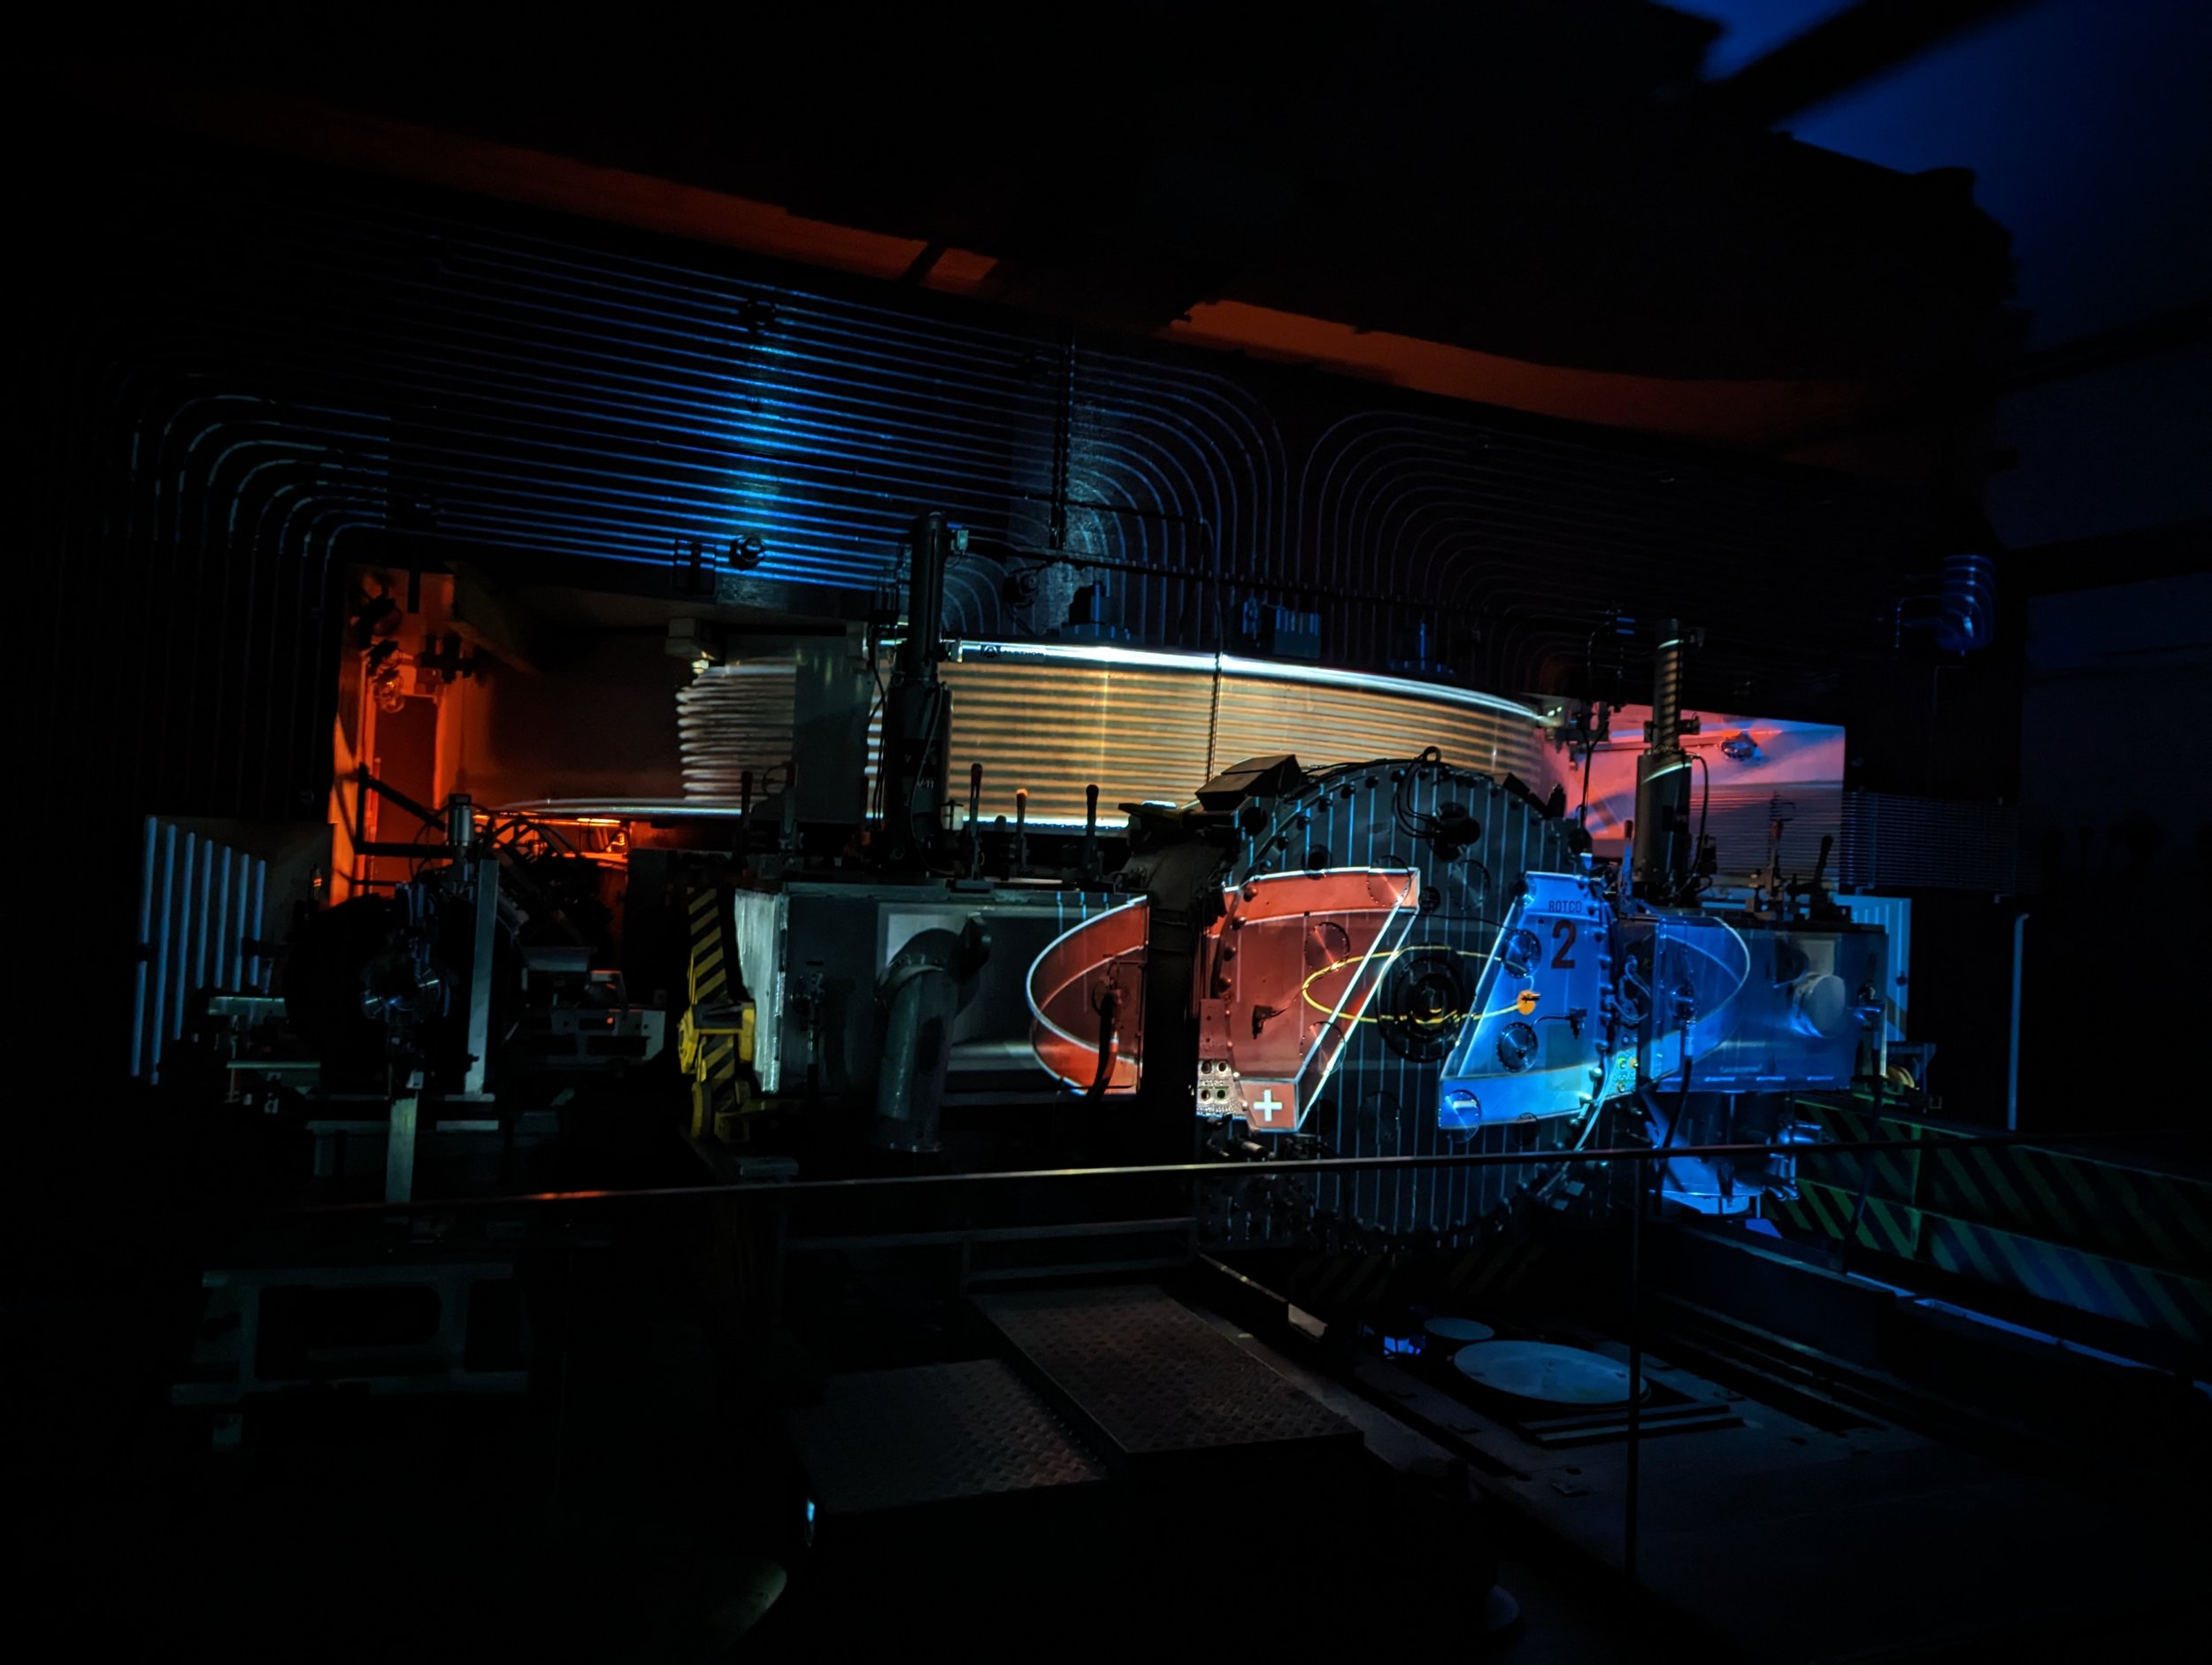 More videoprojection of synchrocyclotron operation